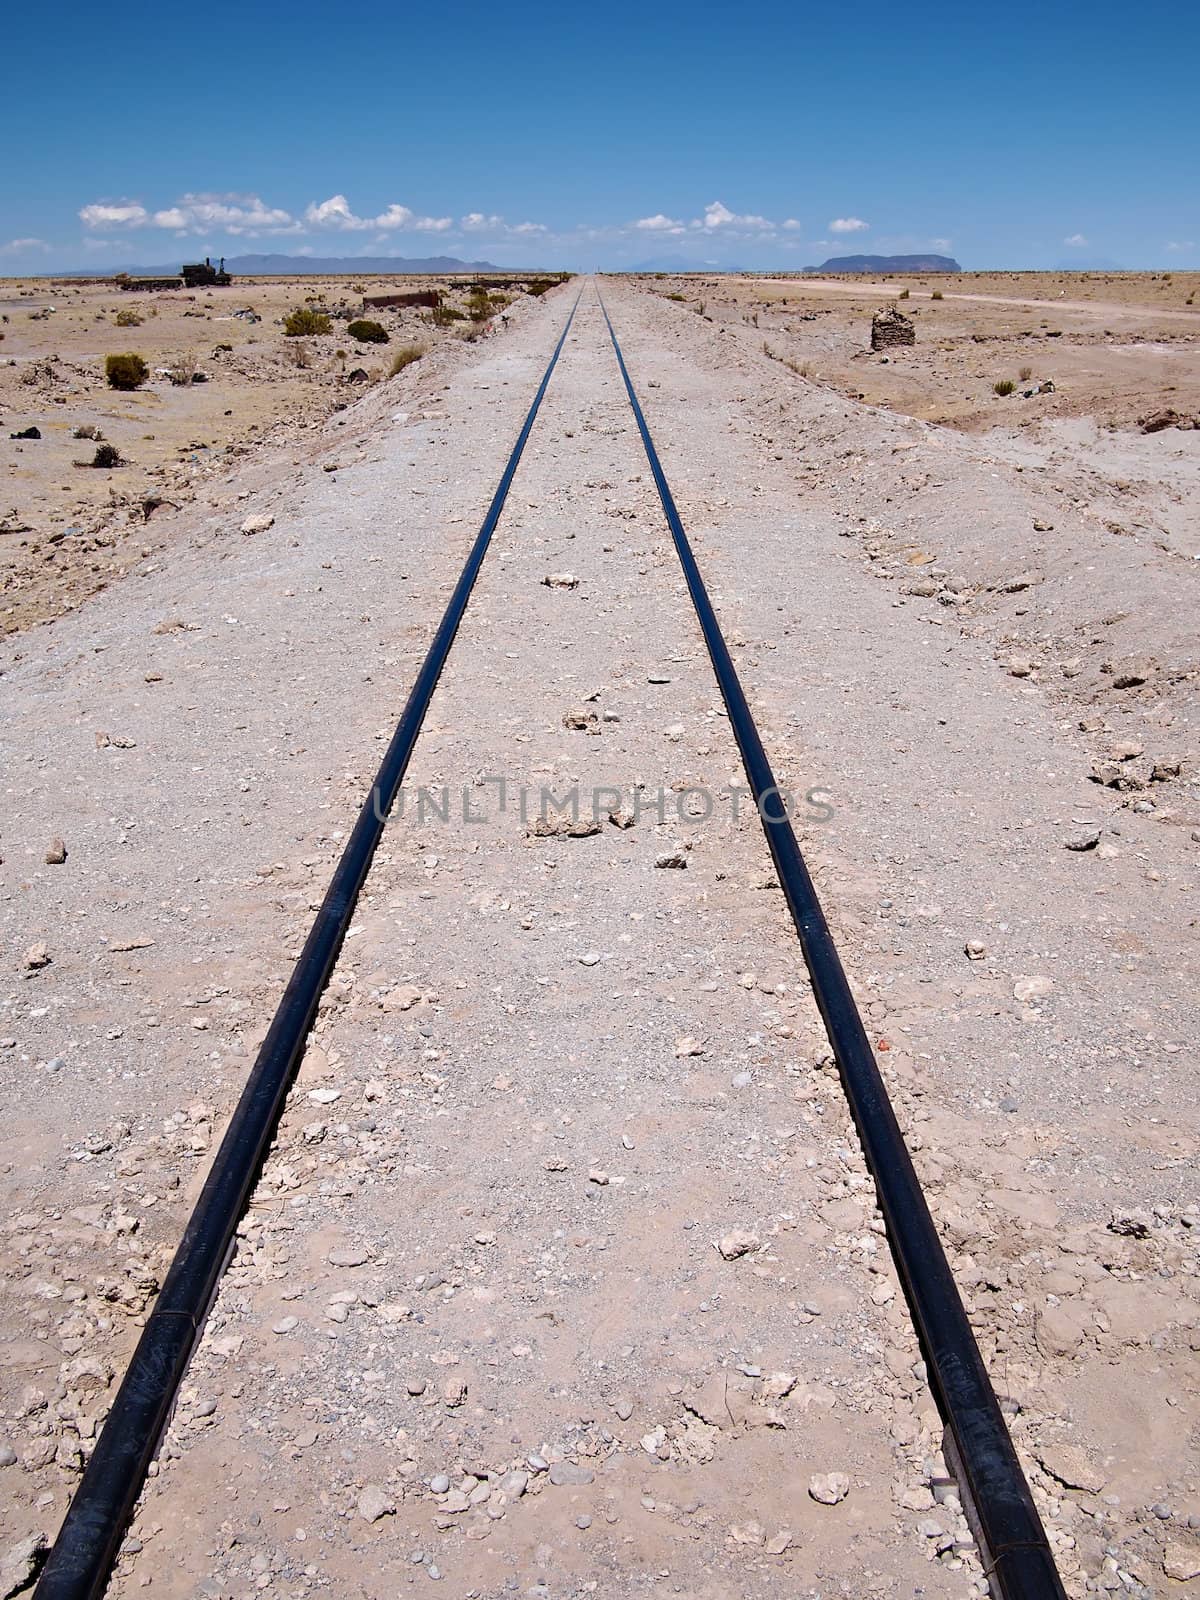 Railroad track leading far away in the distance in the desert at the train graveyard of Uyuni in Bolivia.